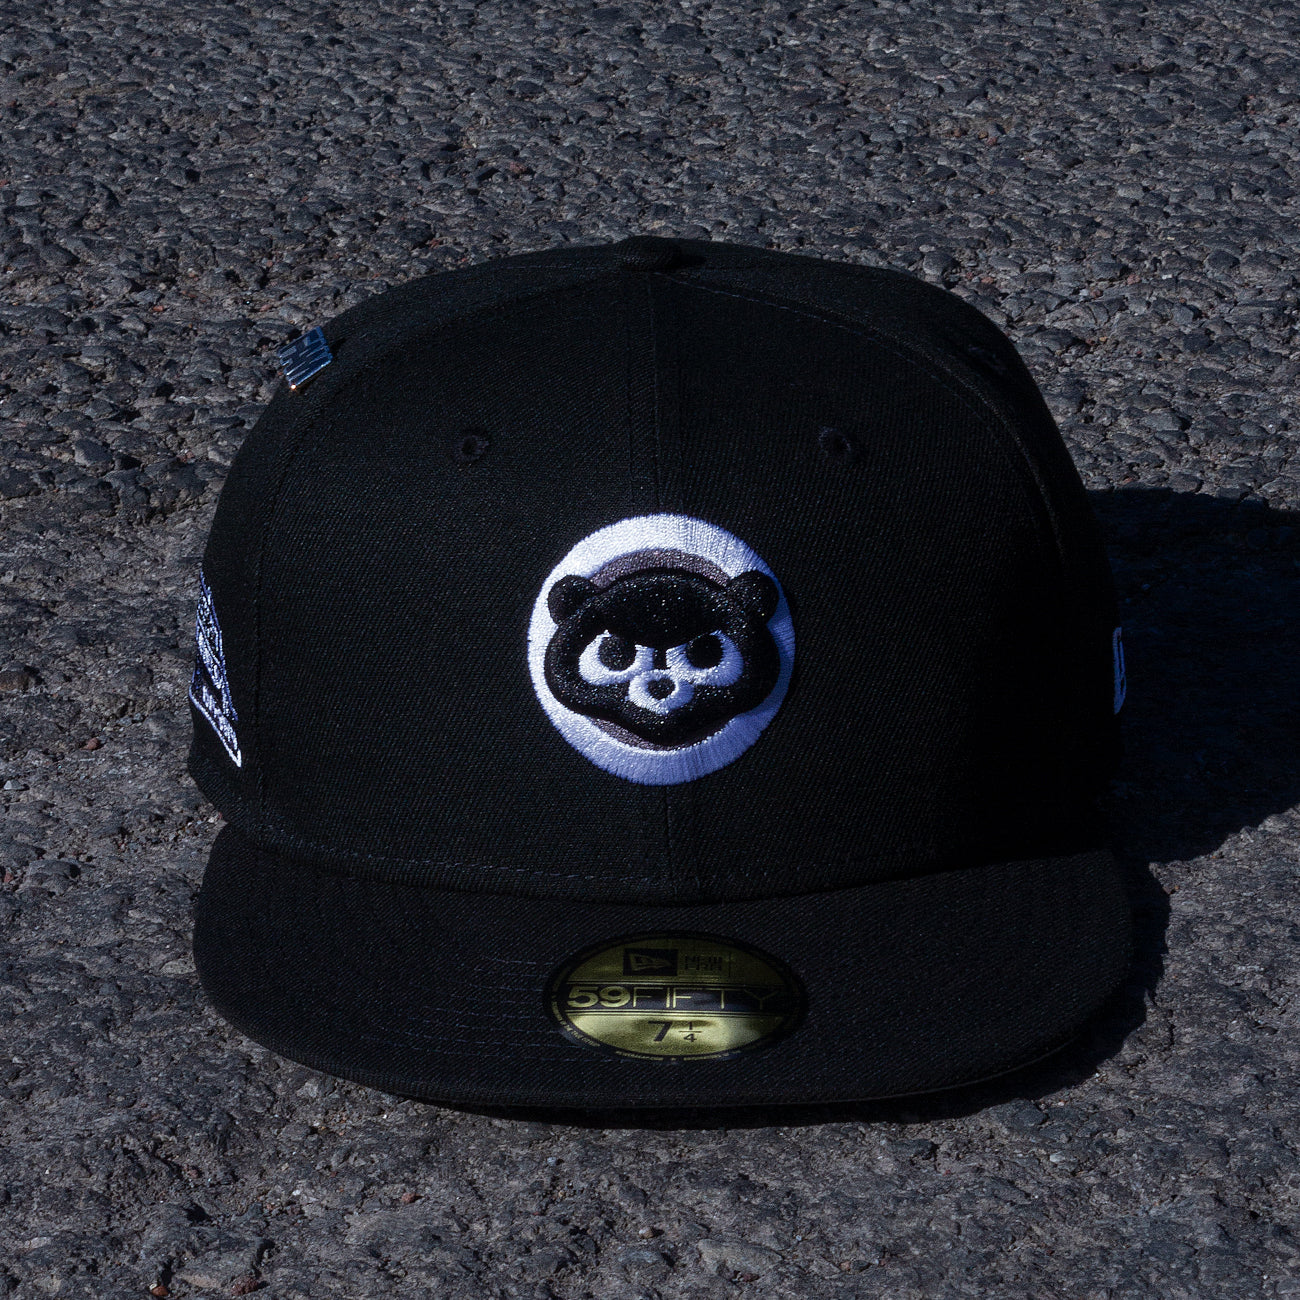 NEW ERA 59FIFTY MLB CHICAGO CUBS WRIGLEY FIELD BLACK / GREY UV FITTED CAP